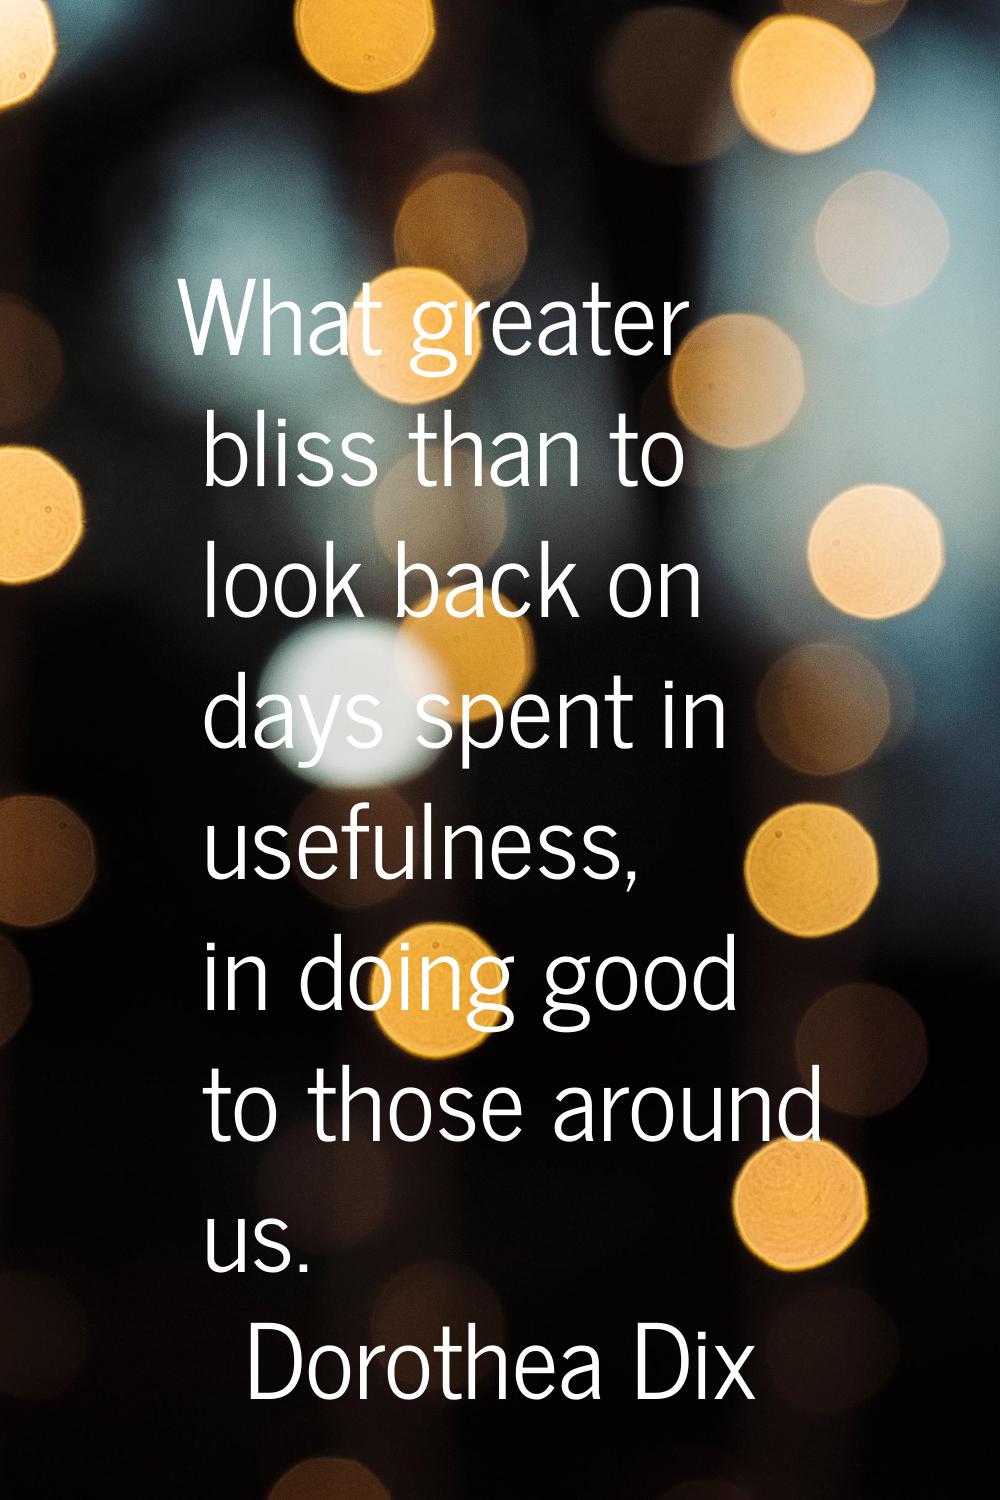 What greater bliss than to look back on days spent in usefulness, in doing good to those around us.